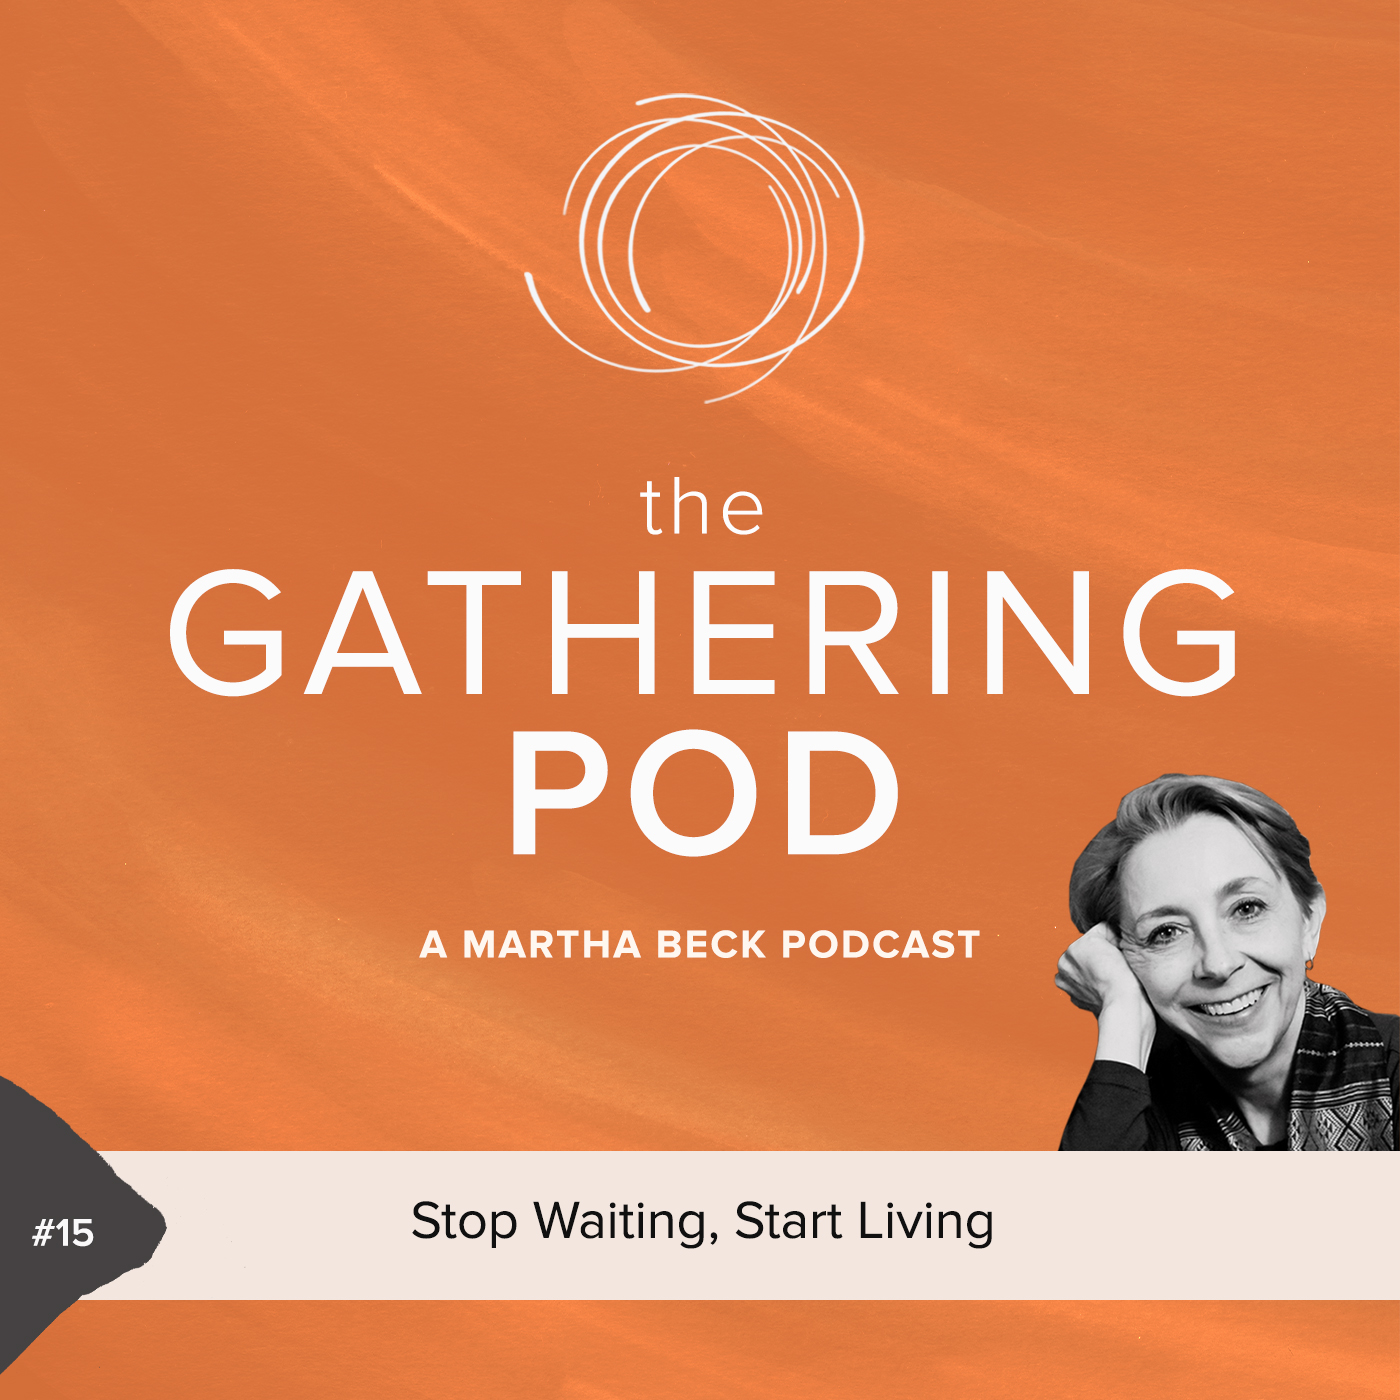 Image for The Gathering Pod A Martha Beck Podcast Episode #15 Stop Waiting, Start Living